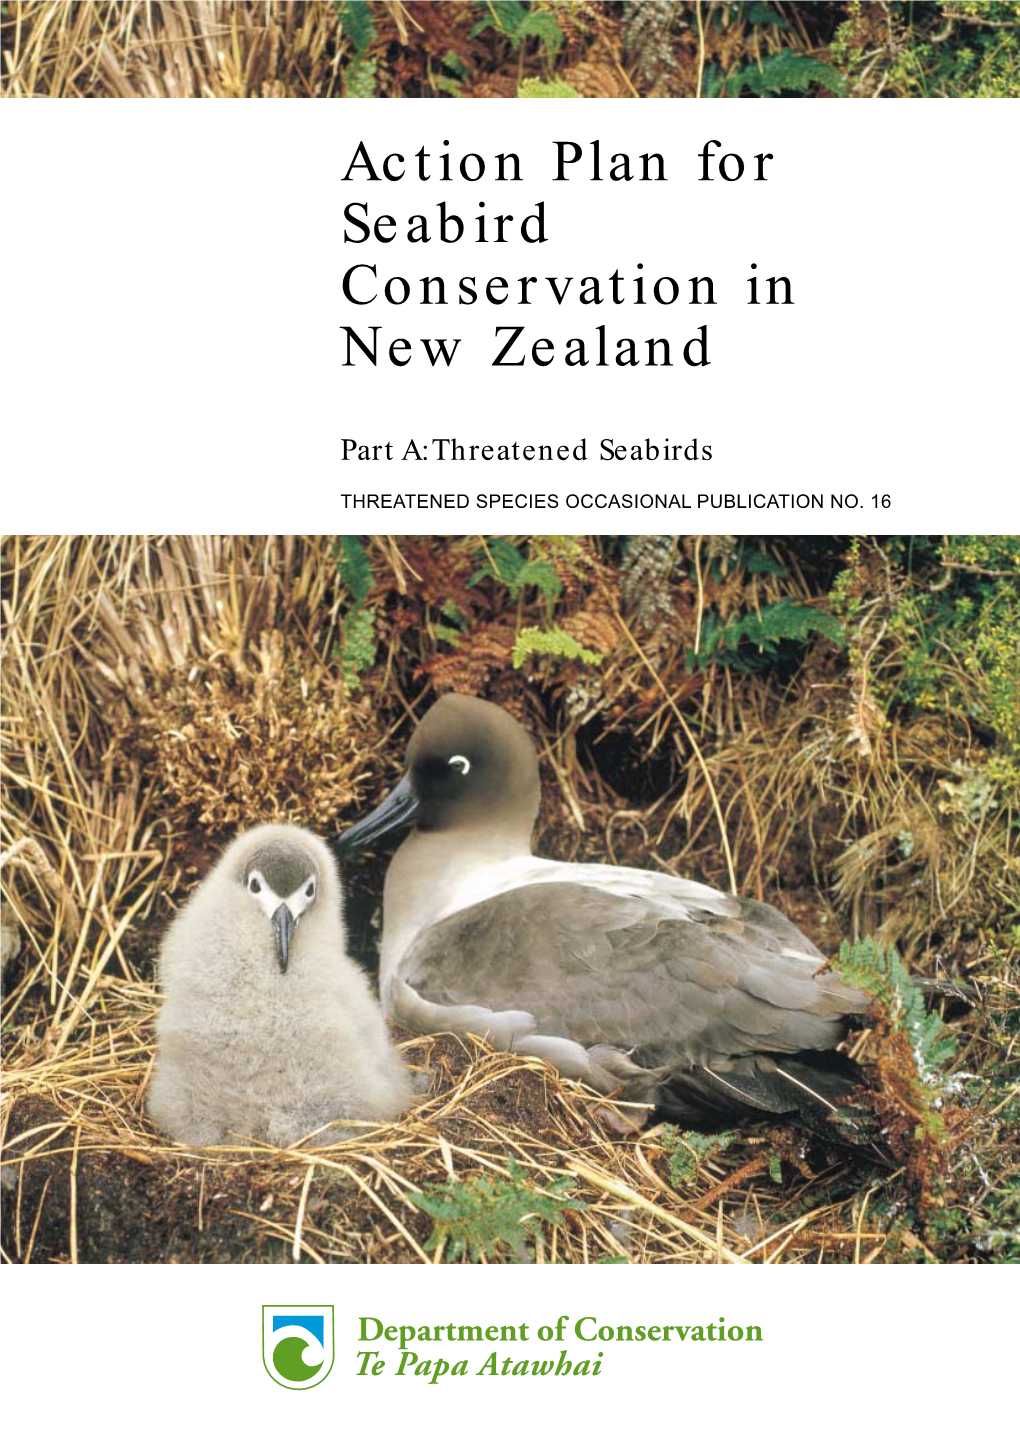 Action Plan for Seabird Conservation in New Zealand